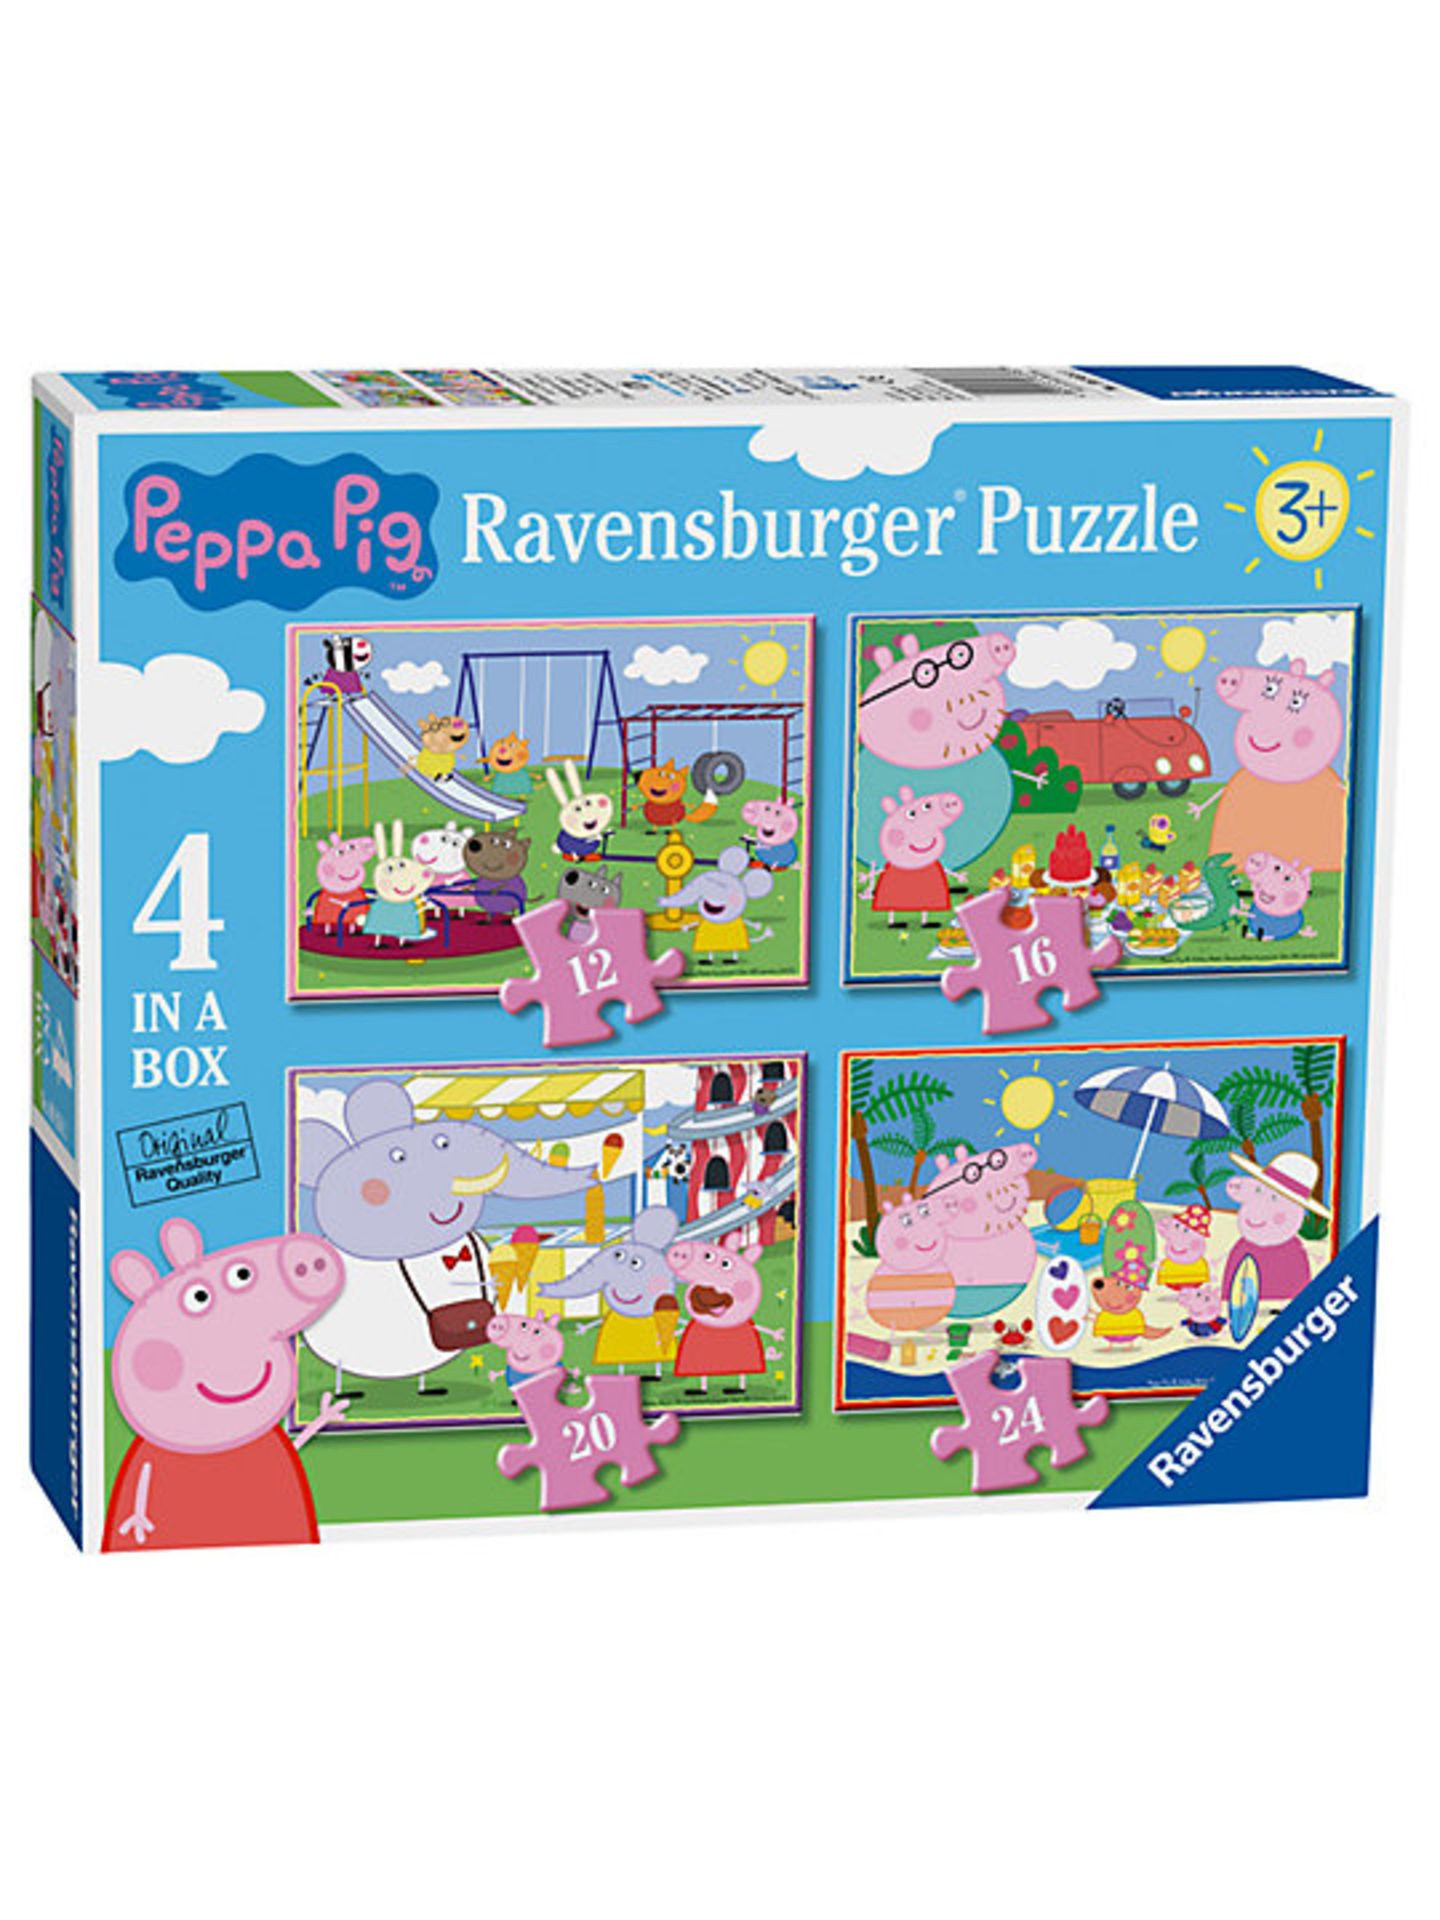 Pallet of Raw Customer Returns - Category - STANDARD TOYS - P100036294 - Image 12 of 54